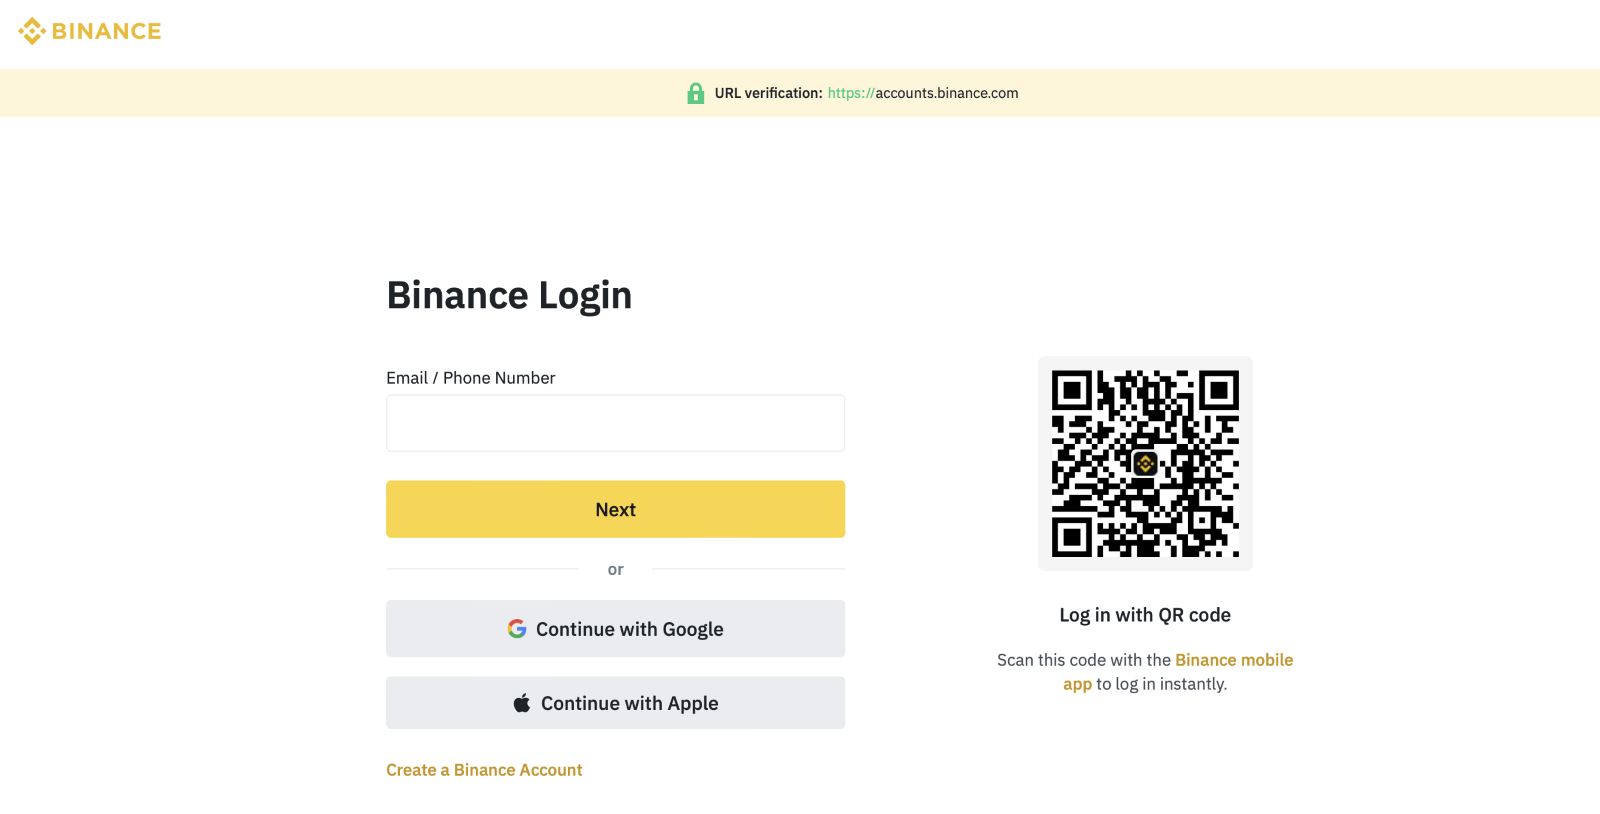 Connect to your Binance account